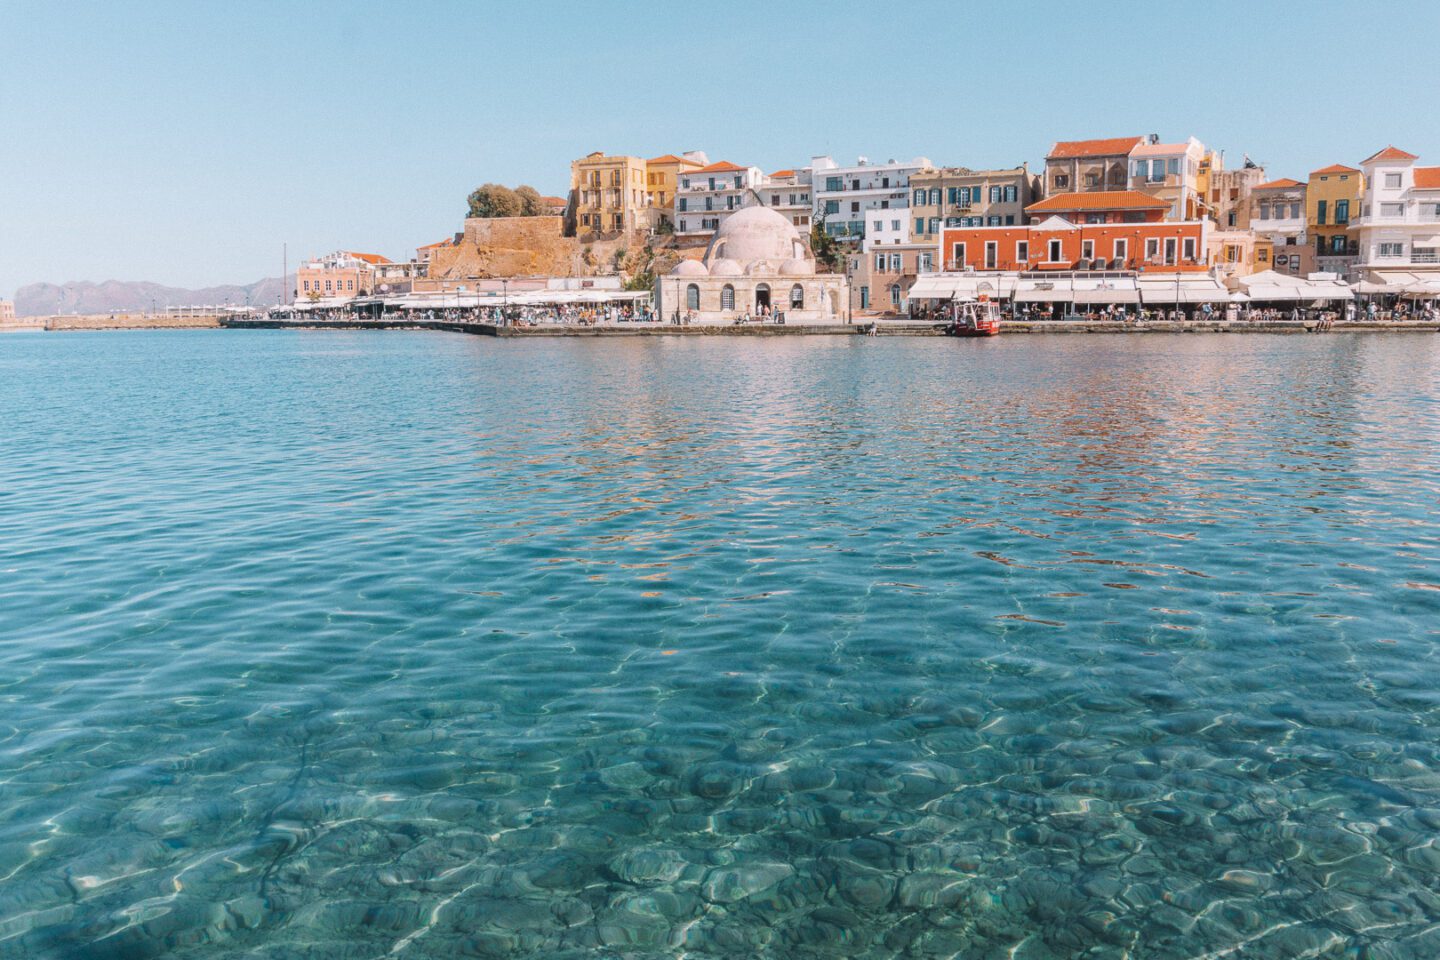 One of the top things to do in Crete Greece is see Chania's old town with it's colourful buildings along the waterfront